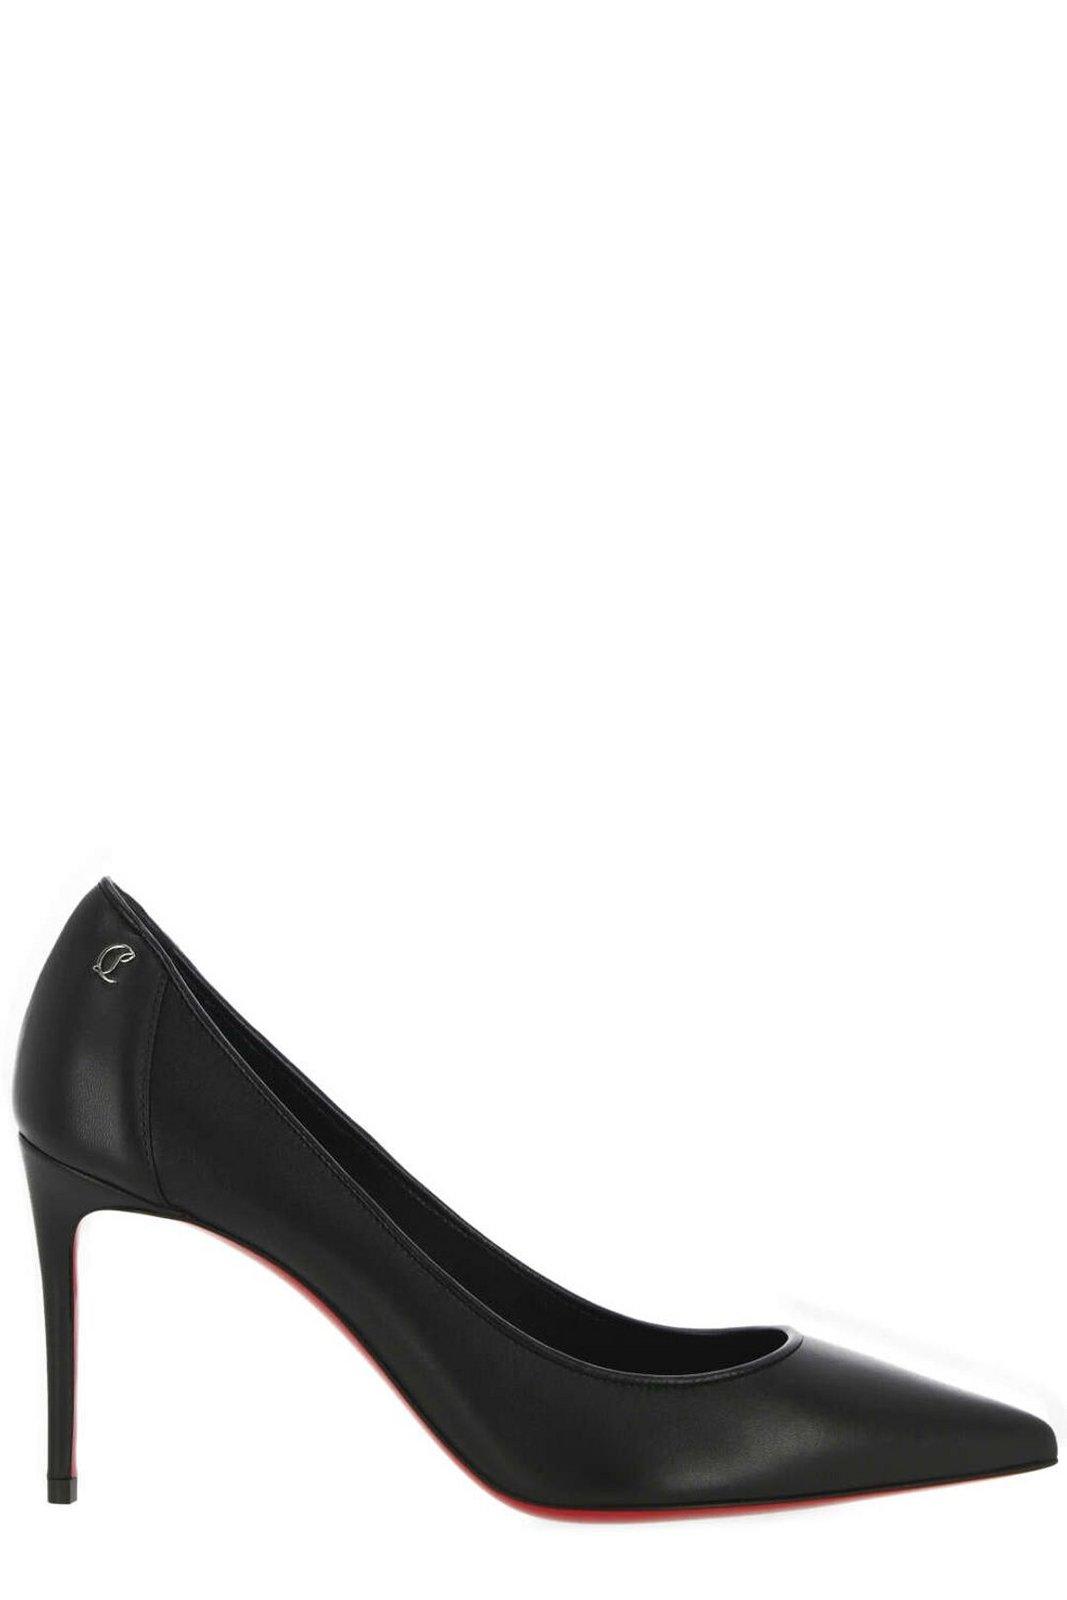 CHRISTIAN LOUBOUTIN POINTED-TOE PUMPS